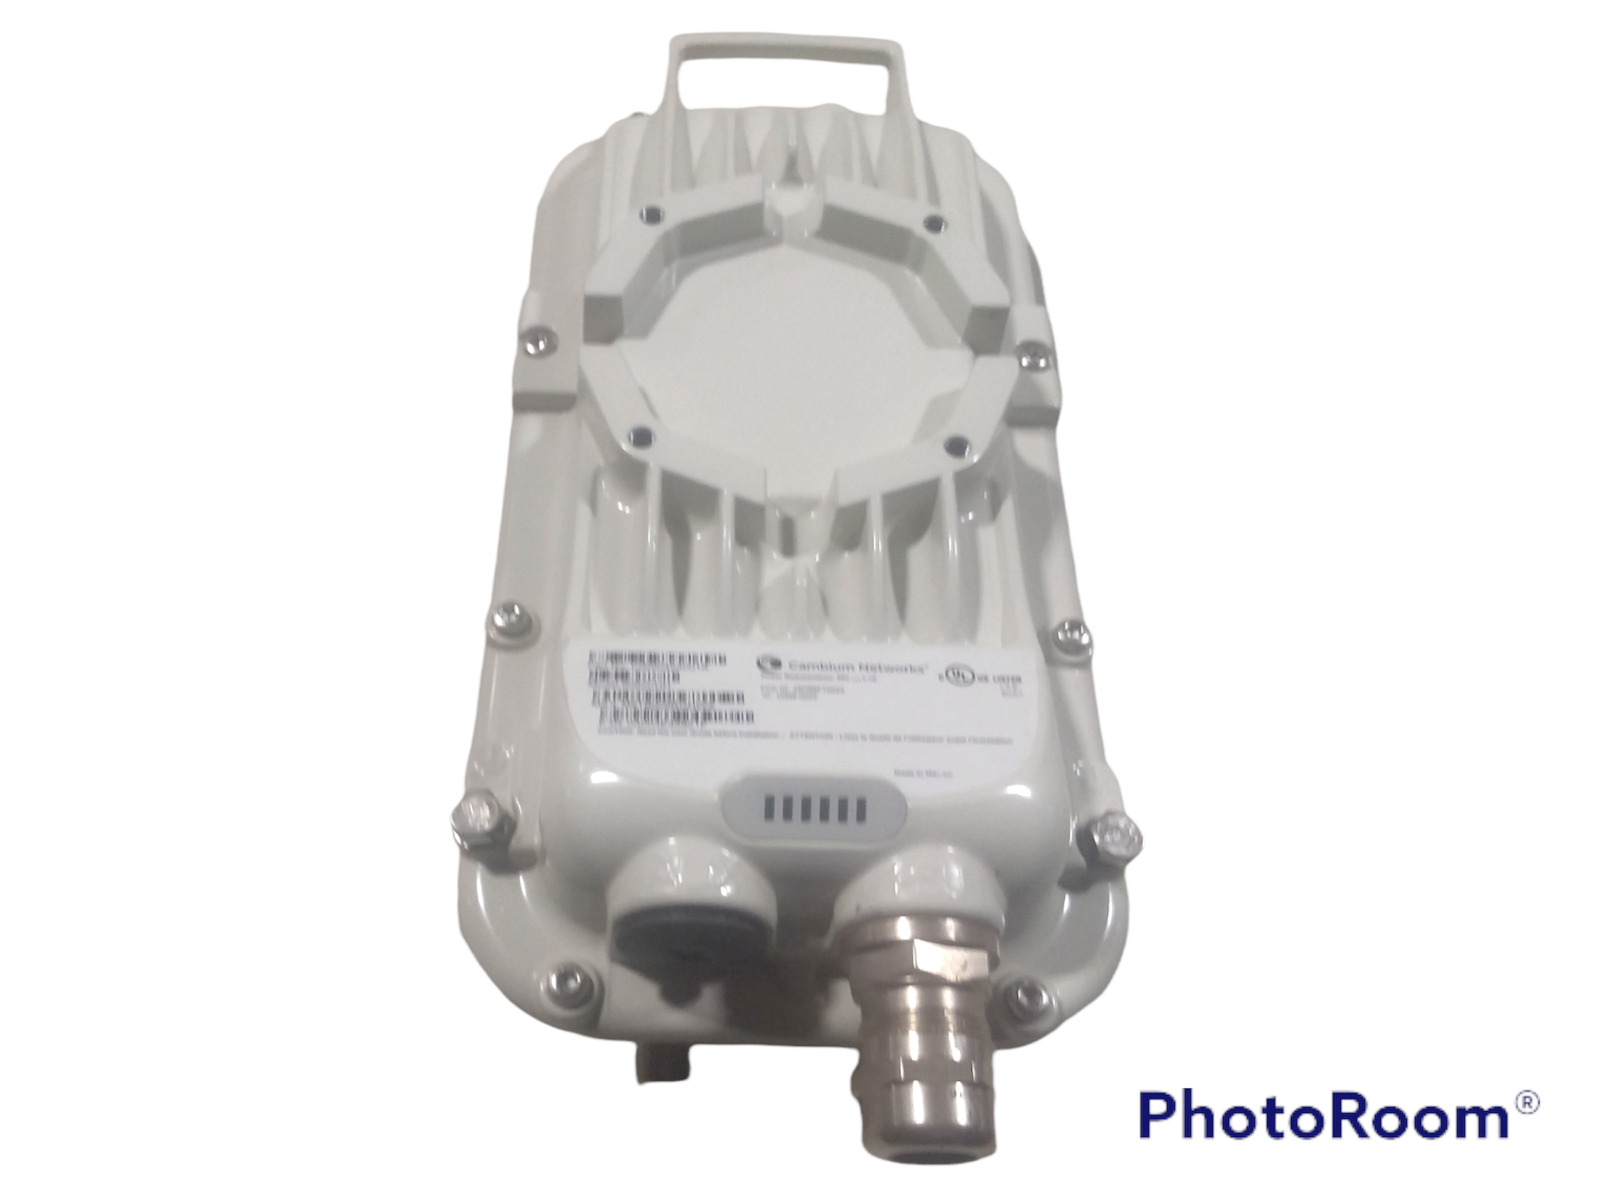 Cambium 900 MHz PMP 450i Connectorized Access Point C009045A001A (unit only)